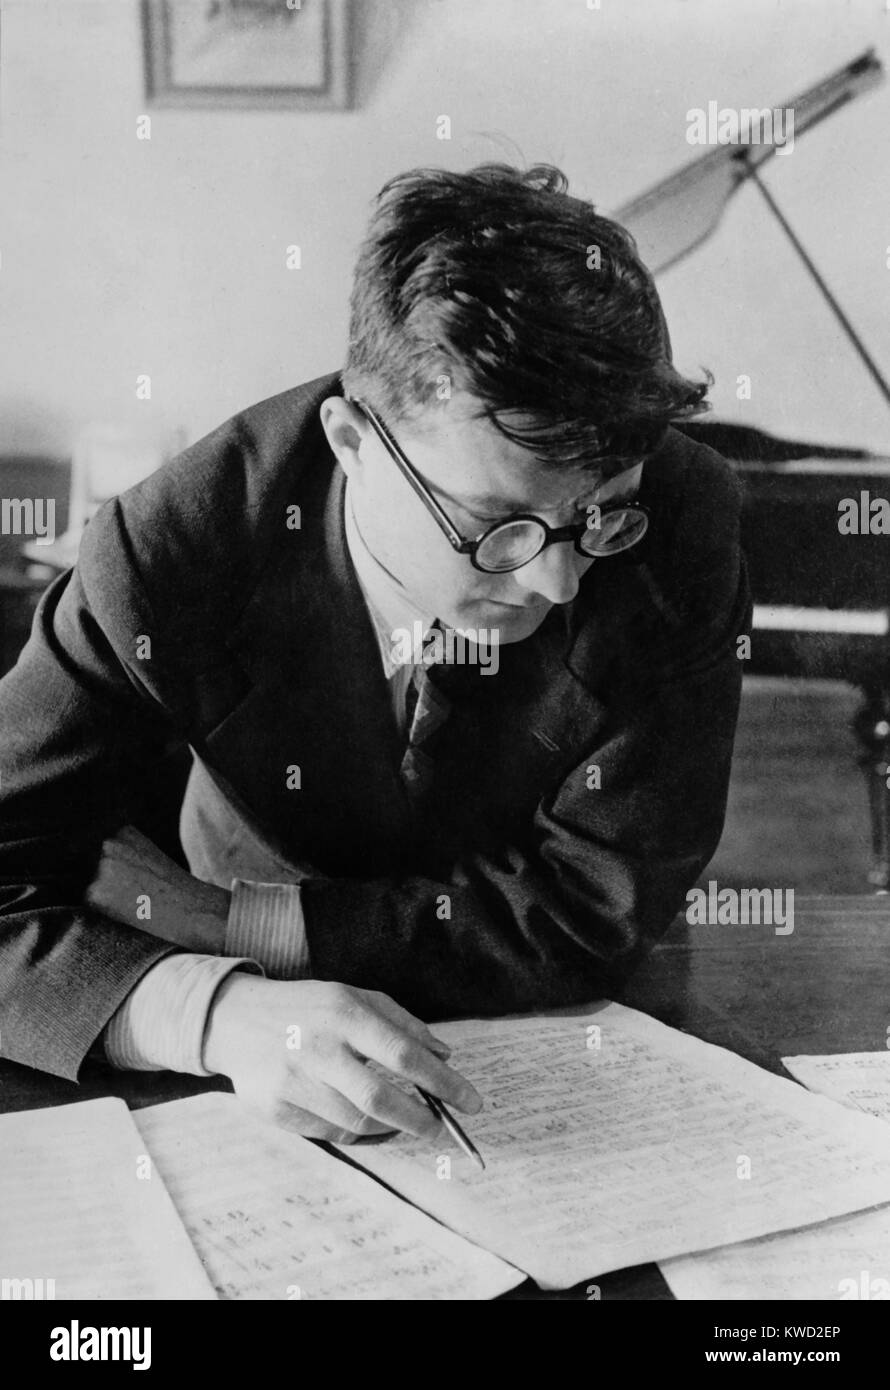 Dmitri Shostakovich, Russian composer, studying a piece of music, 1942-43. In Dec. 1941 he dedicated his Symphony No. 7 in C major, to the City of Leningrad, then enduring the 4th month was a Nazi German siege, which would continue for another 2 years  (BSLOC 2017 20 184) Stock Photo